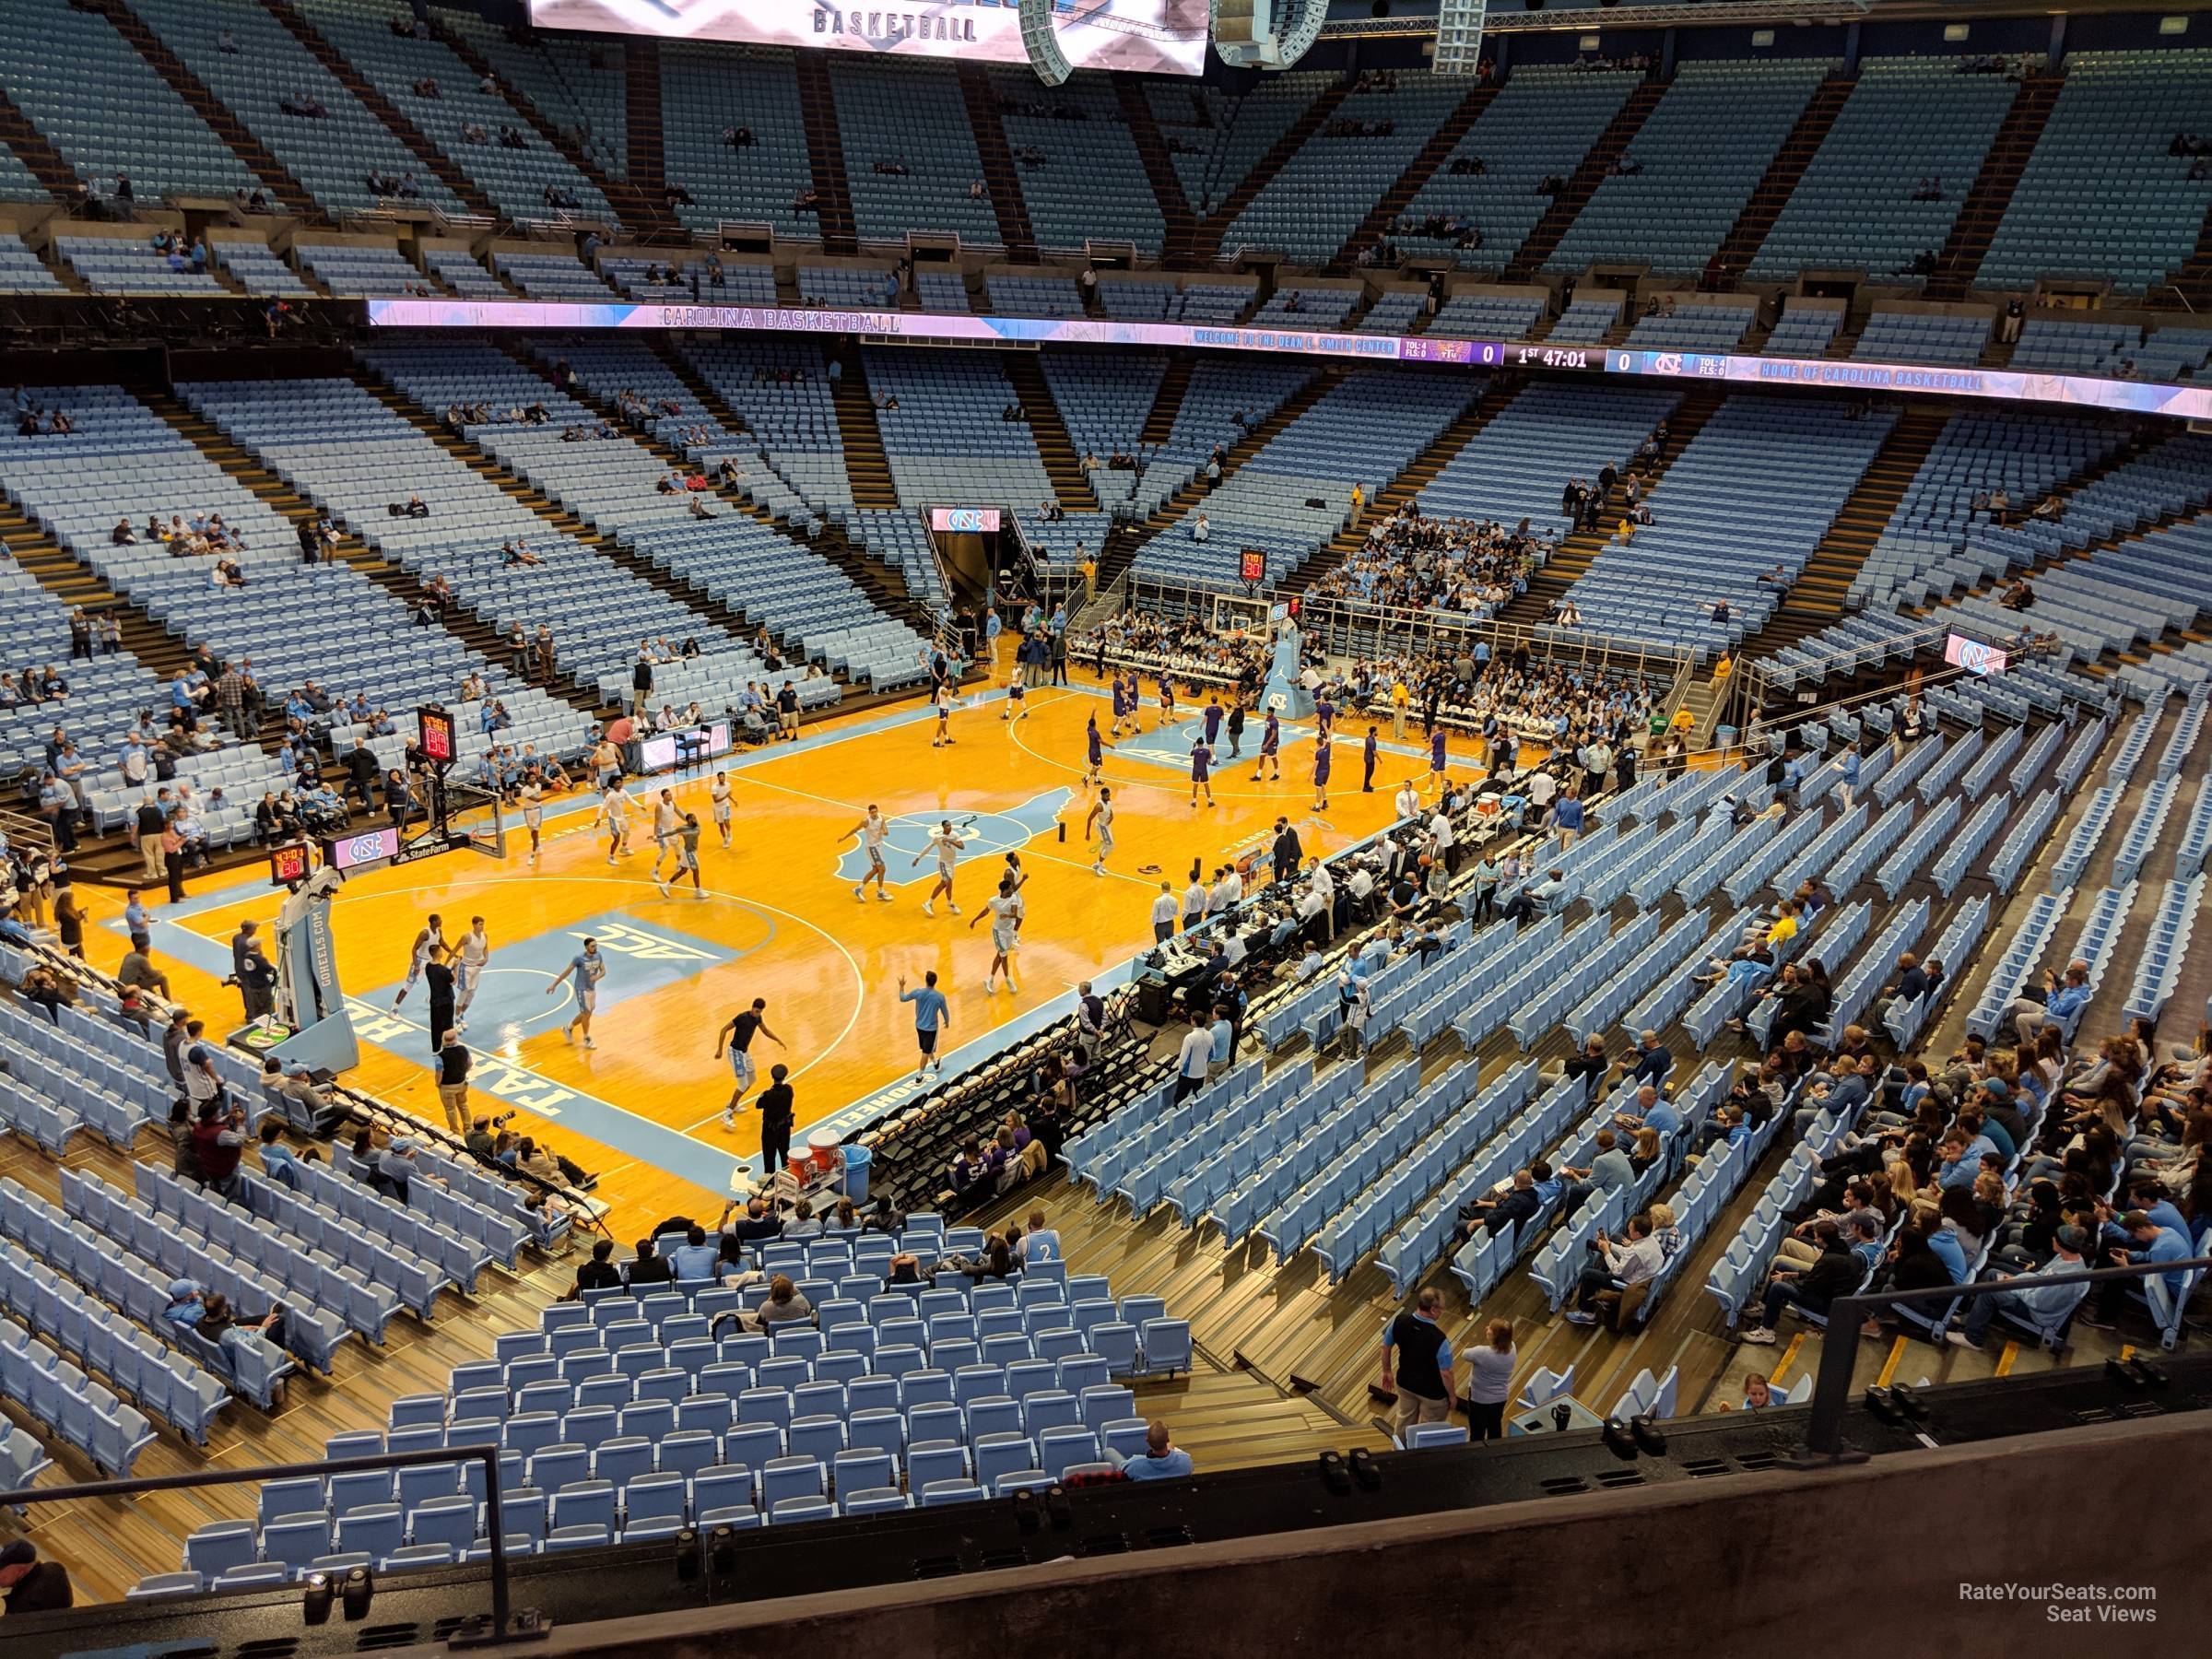 section 204, row c seat view  - dean smith center